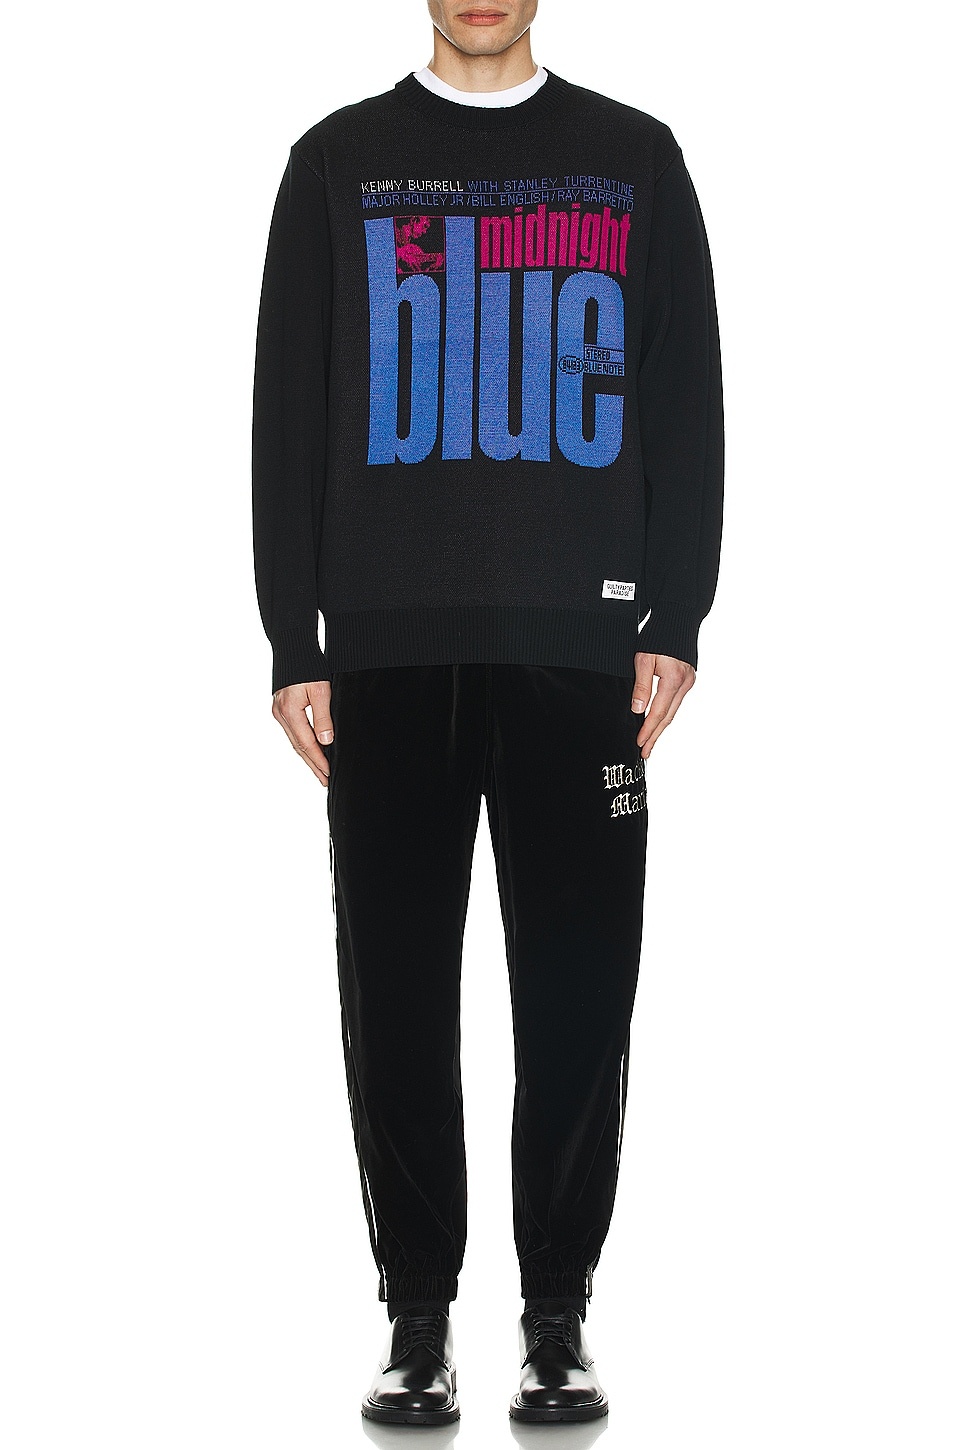 Blue Note Jacquard Sweater - 5